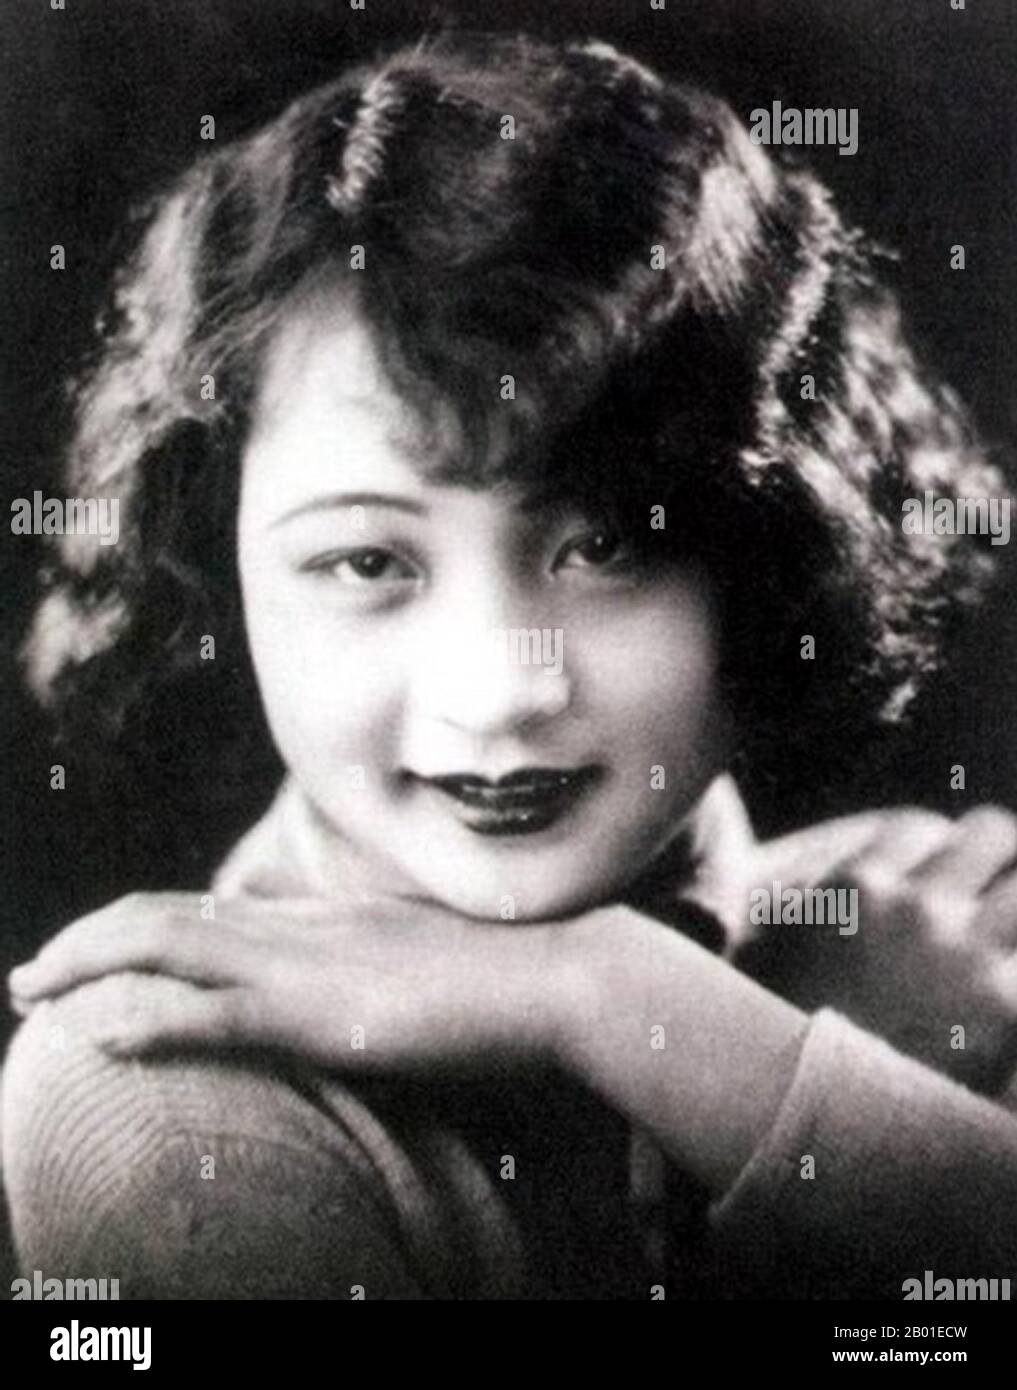 China: Li Lili (黎莉莉, 2 June 1915 - 7 August 2005), Shanghai-based Chinese film actress in the 1930s and 1940s, c. 1930s.  Li was born Qian Zhenzhen in Beijing. Her father, Qian Zhuangfei, was an important figure among the early heroes of the Communist Party. In 1927 she moved to Shanghai, where her father encouraged her to join the China National Song & Dance Troupe, later renamed Bright Moon Song and Dance Troupe. Li Jinhui, later known as the Father of Chinese popular music, was the conductor of the troupe and adopted her as his god-daughter, and she adopted his surname. Stock Photo